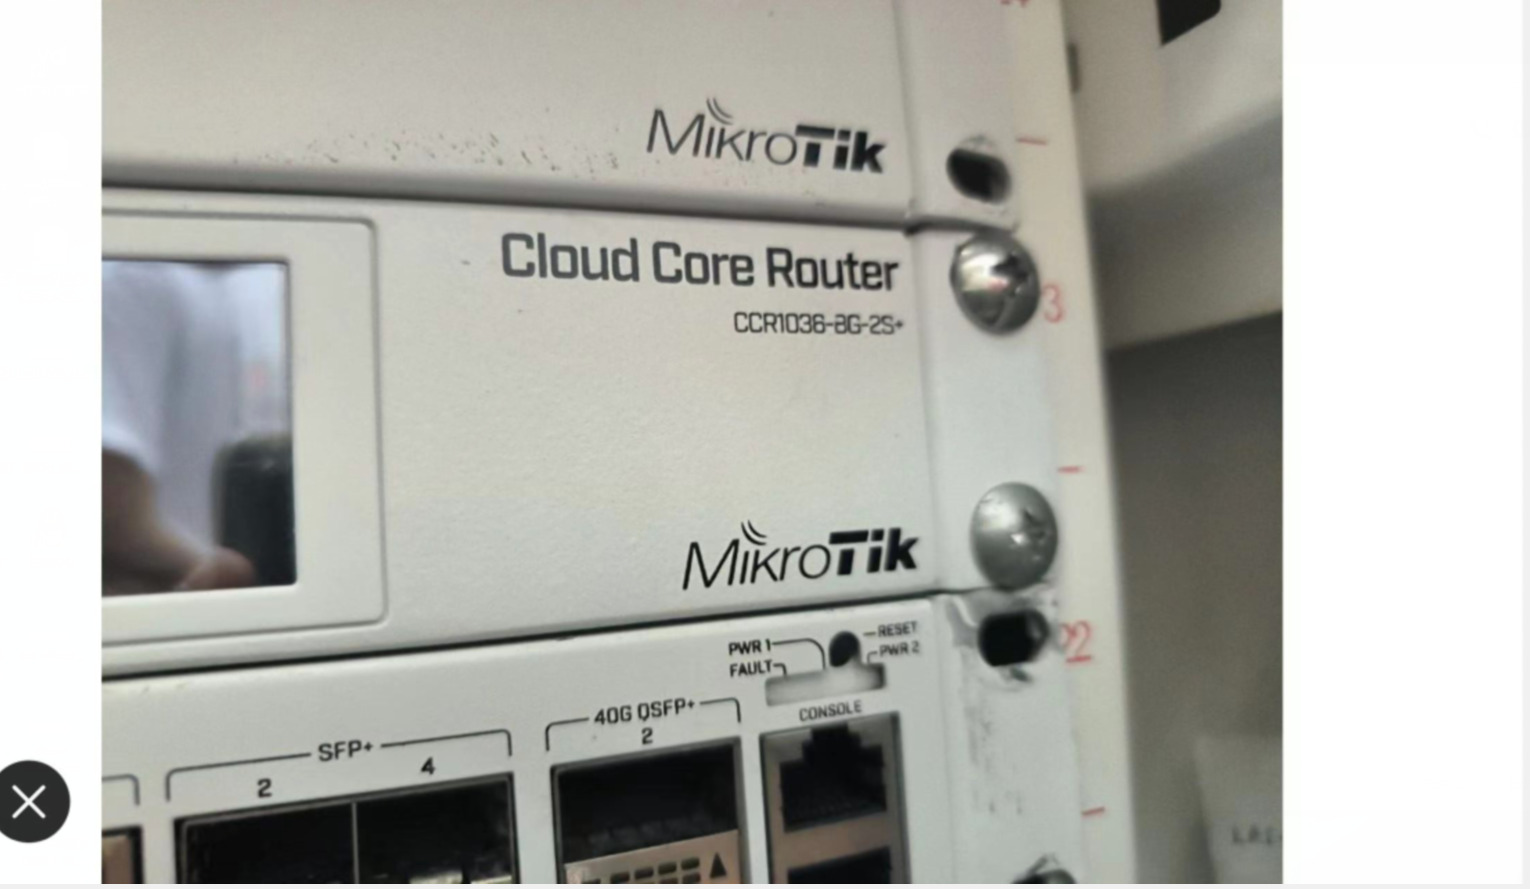 MikroTIK CCR1036-8G-2S+ Cloud Core Router Tested & Fast Shipping 